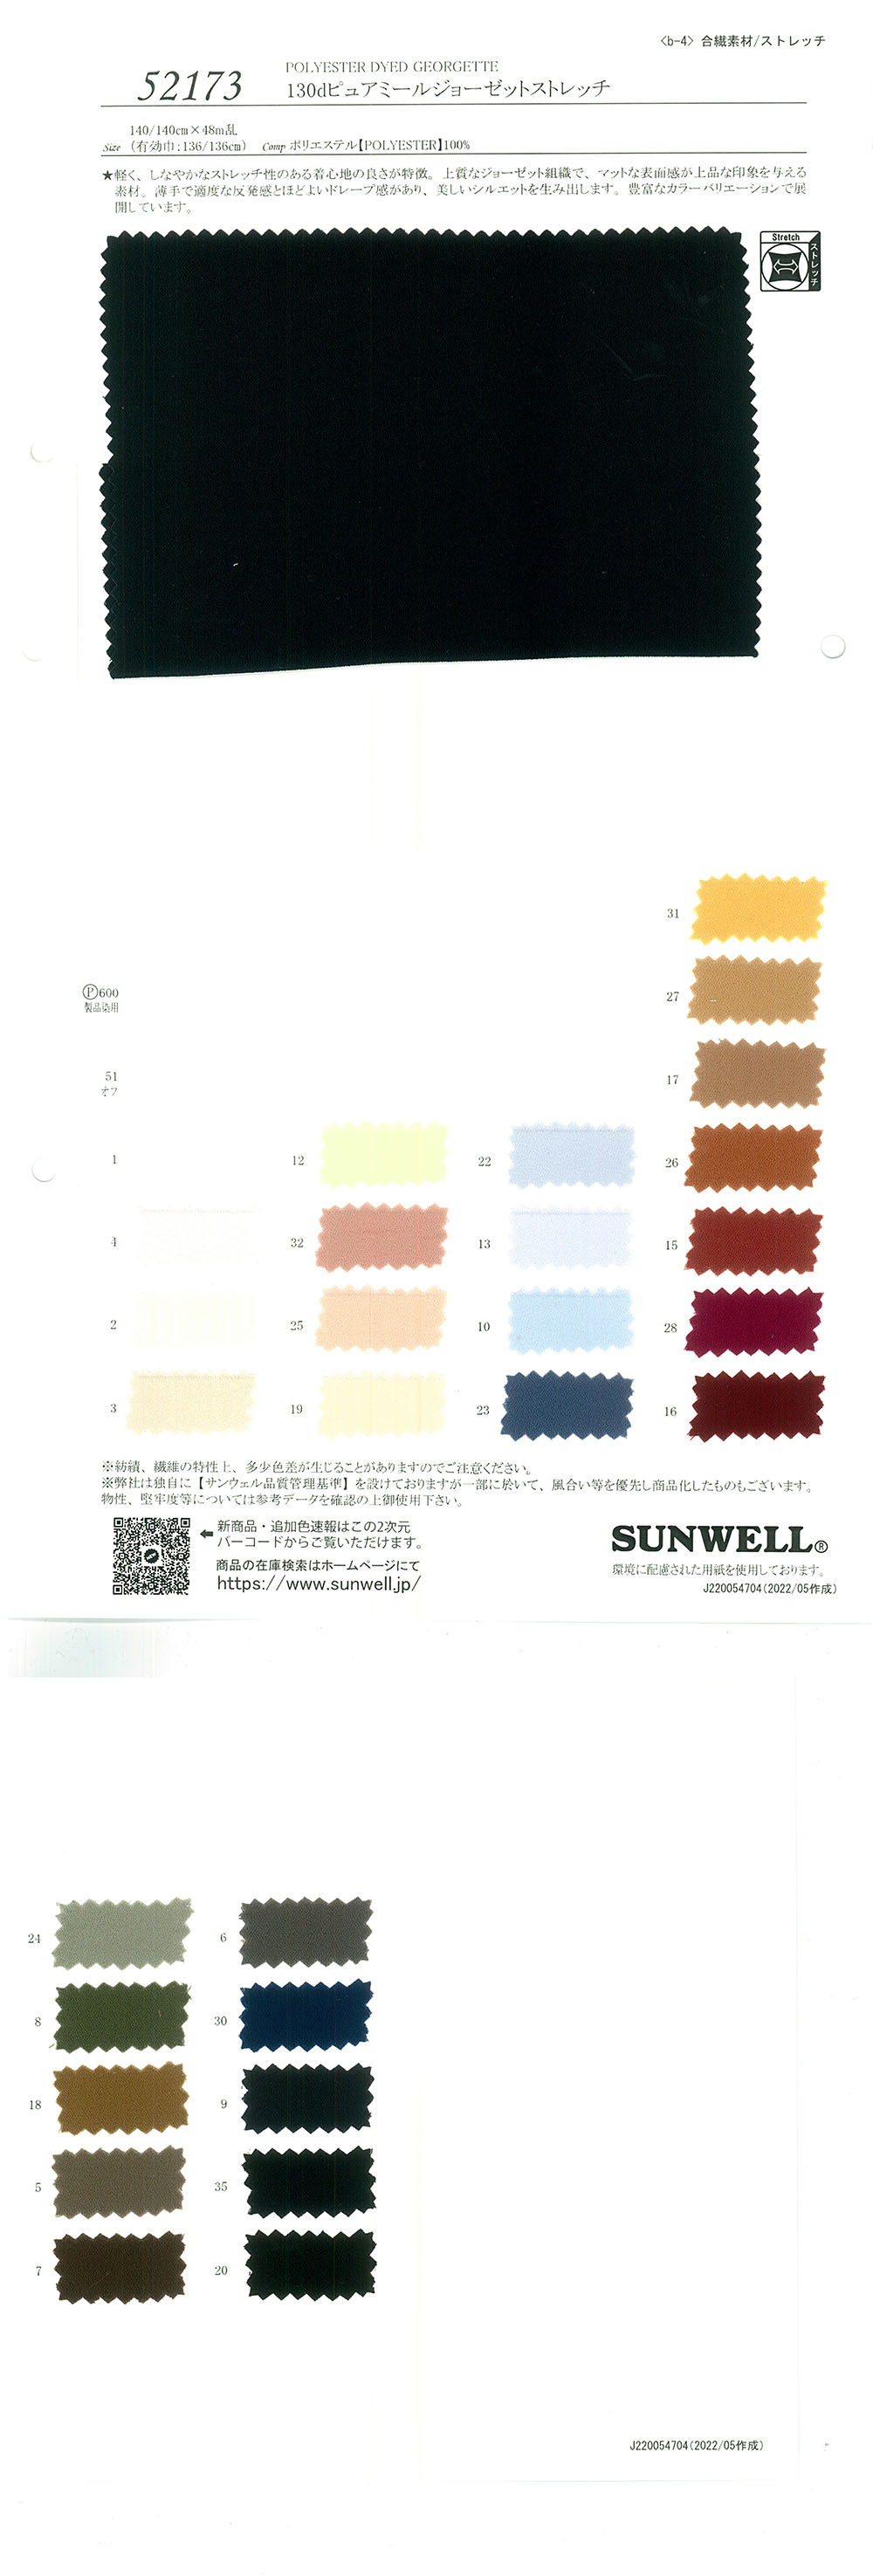 52173 130d Pure Meal Georgette Stretch[Textilgewebe] SUNWELL